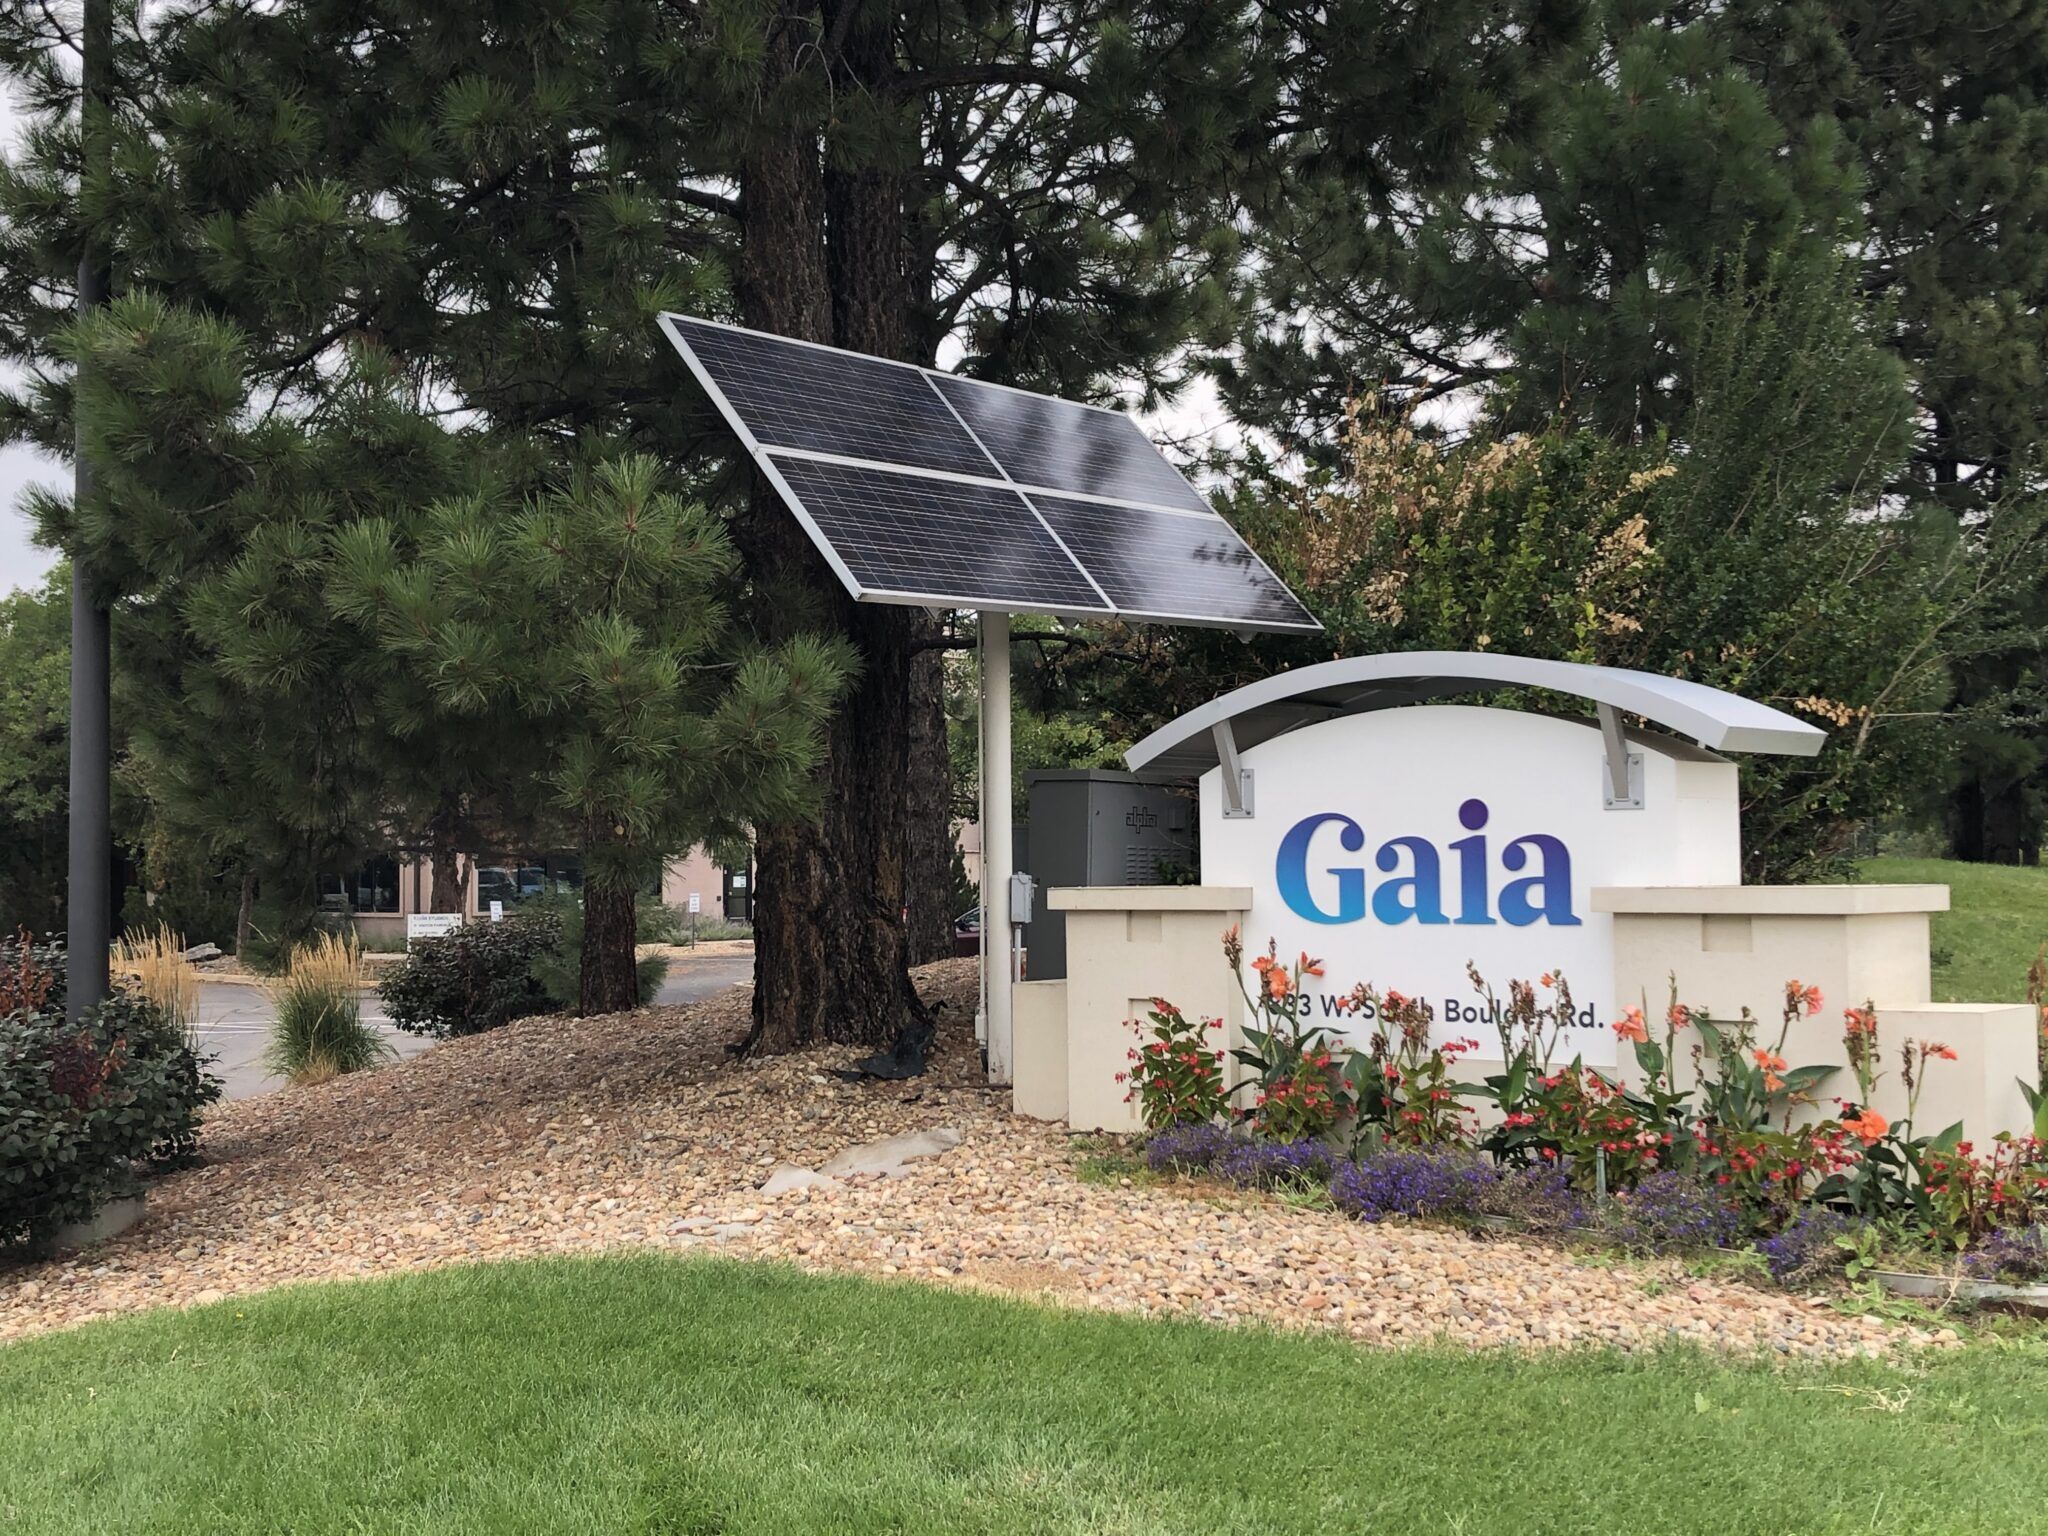 Gaia’s video service sees nearly double-digit membership growth